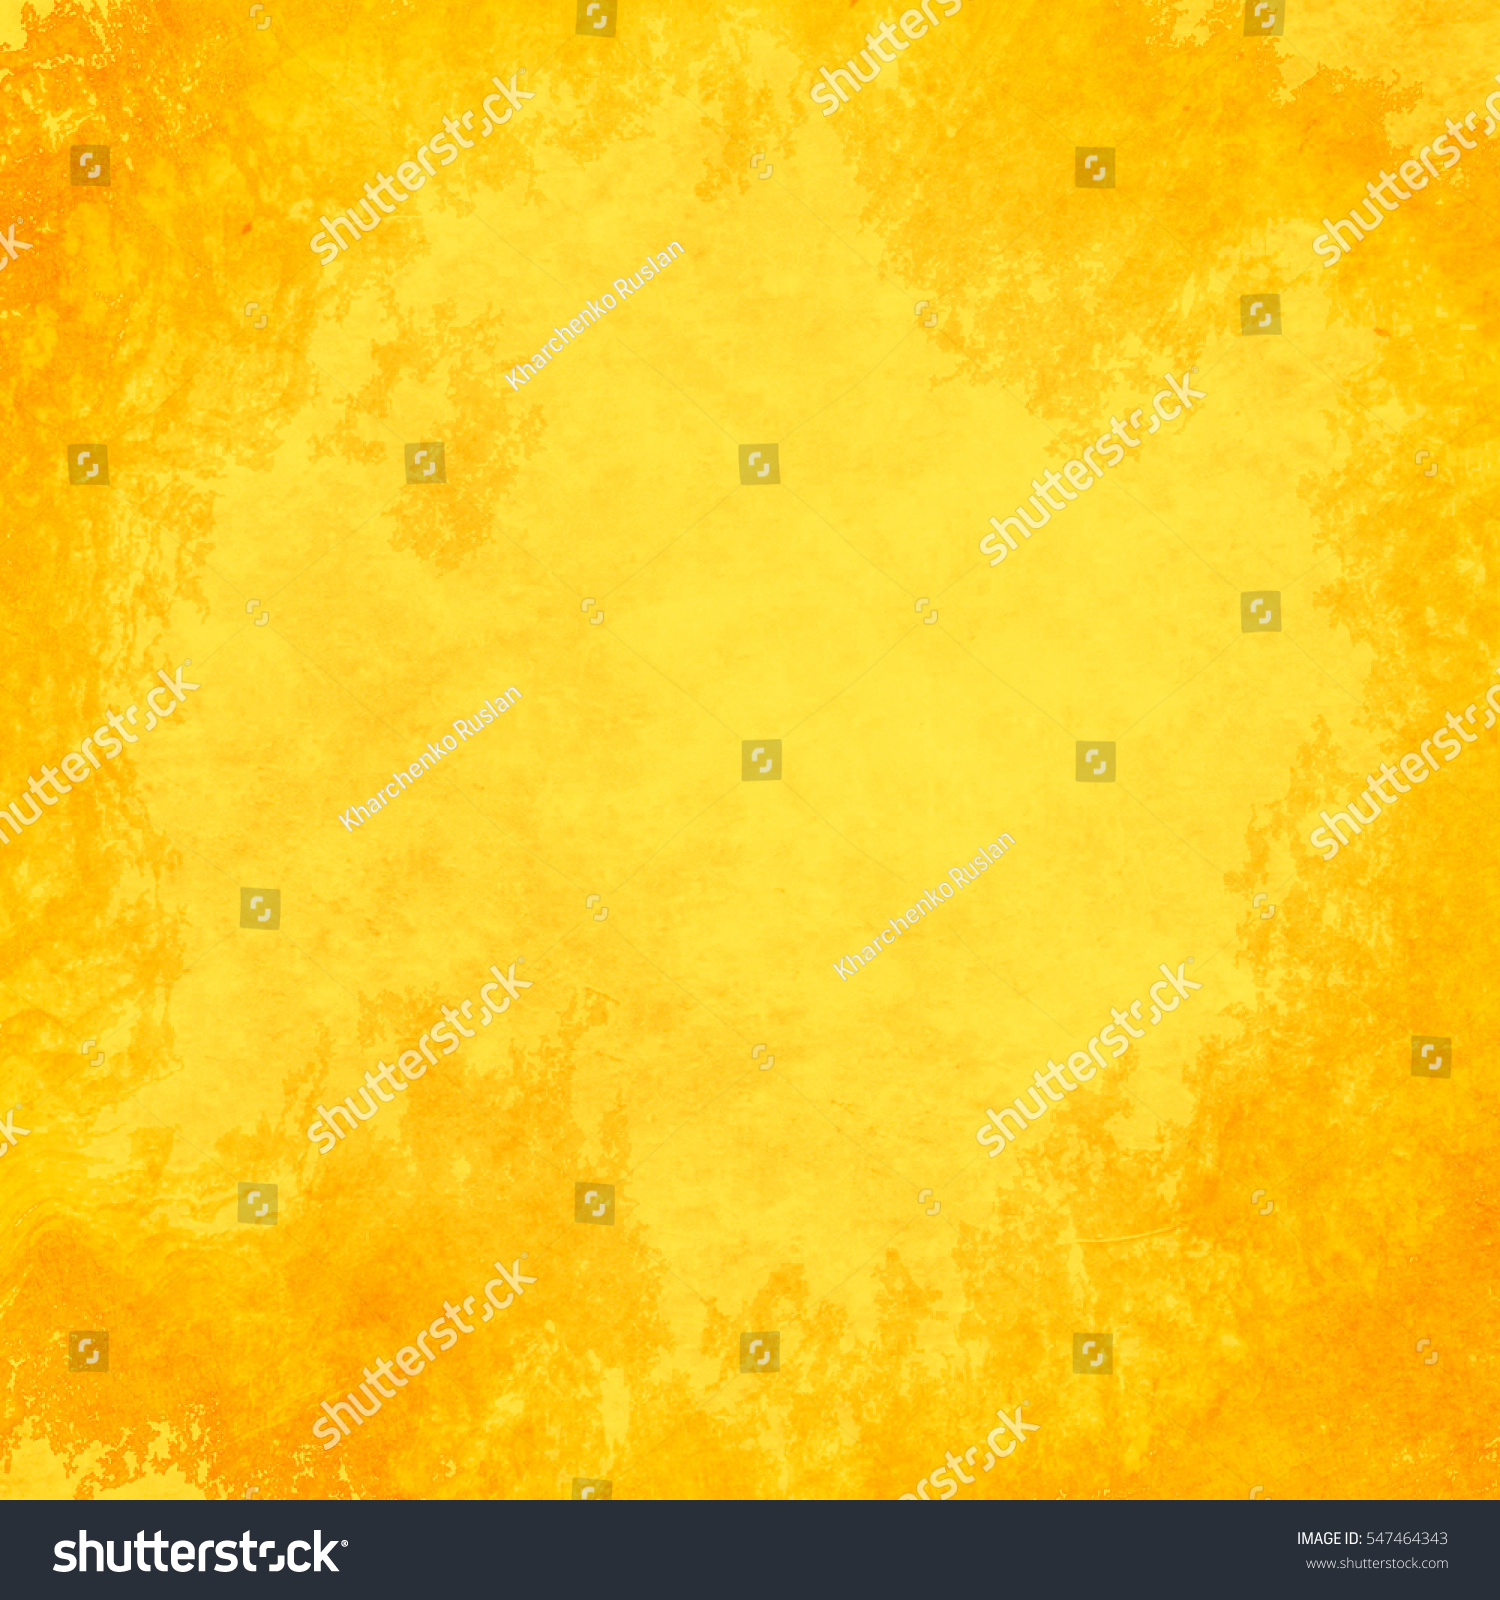 abstract yellow background texture #547464343